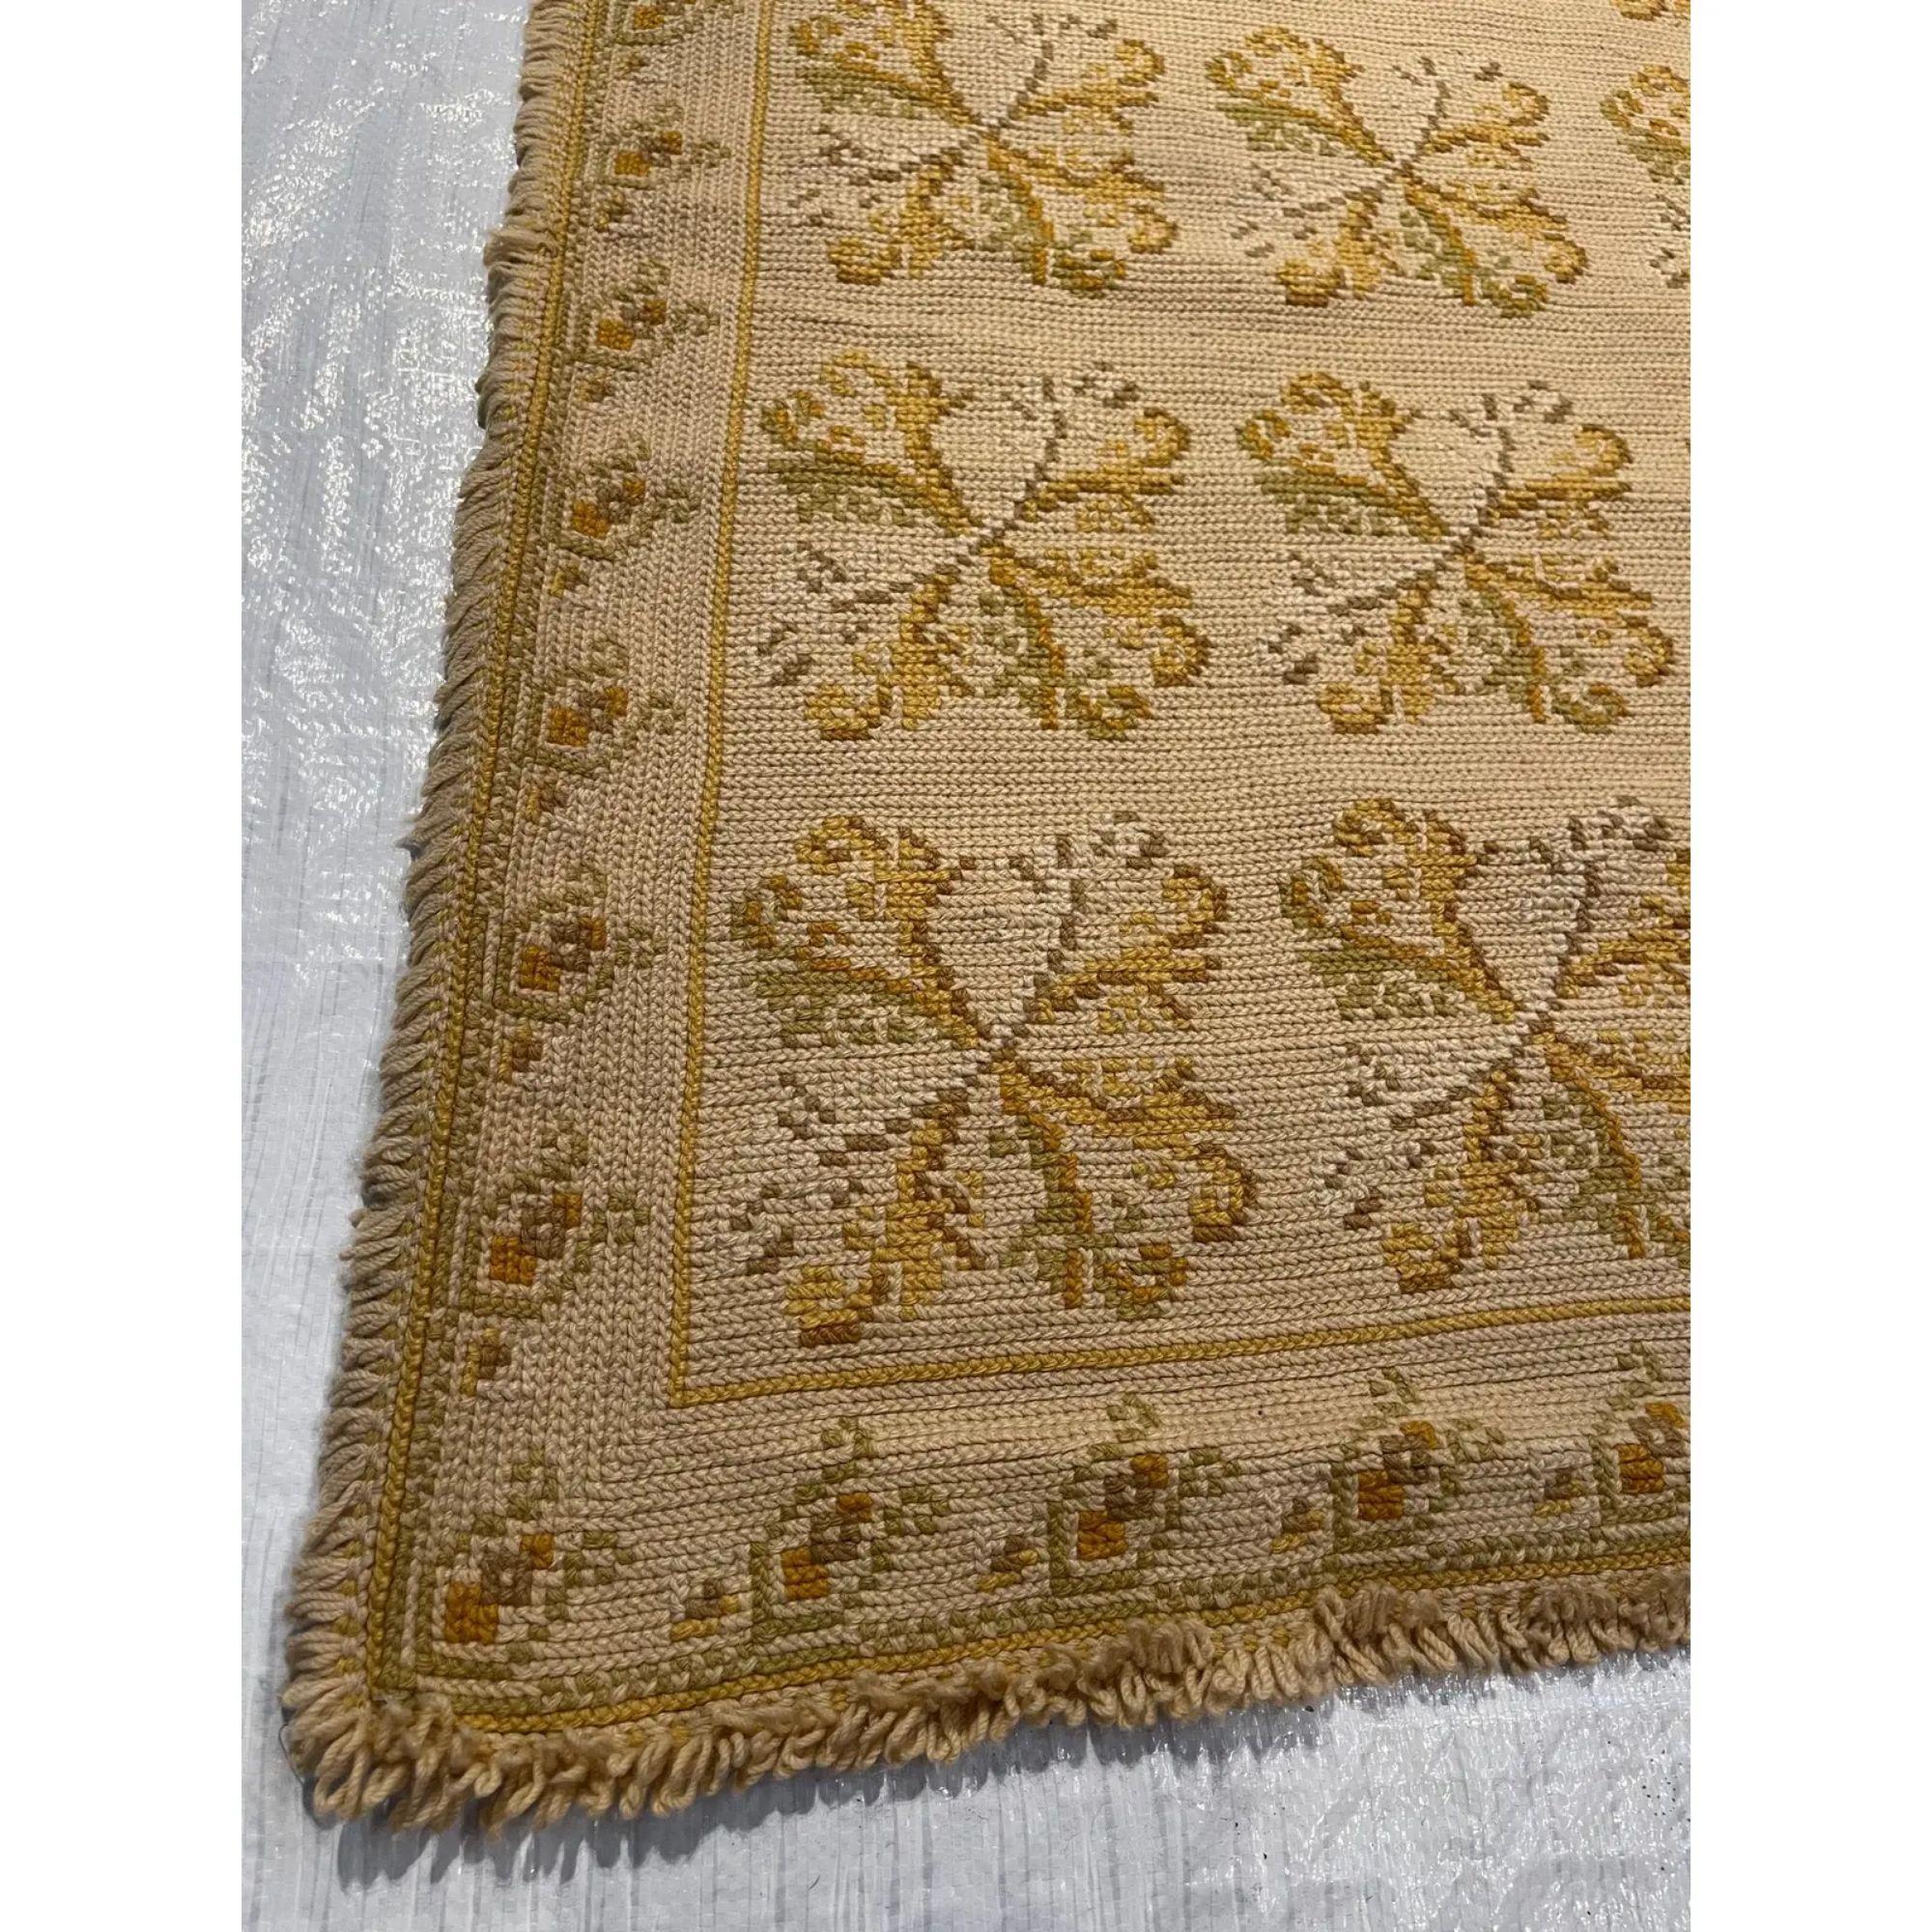 Early 20th Century 1920s Antique European Portuguese Arriolos Rug 15'7'' X 12'1'' For Sale